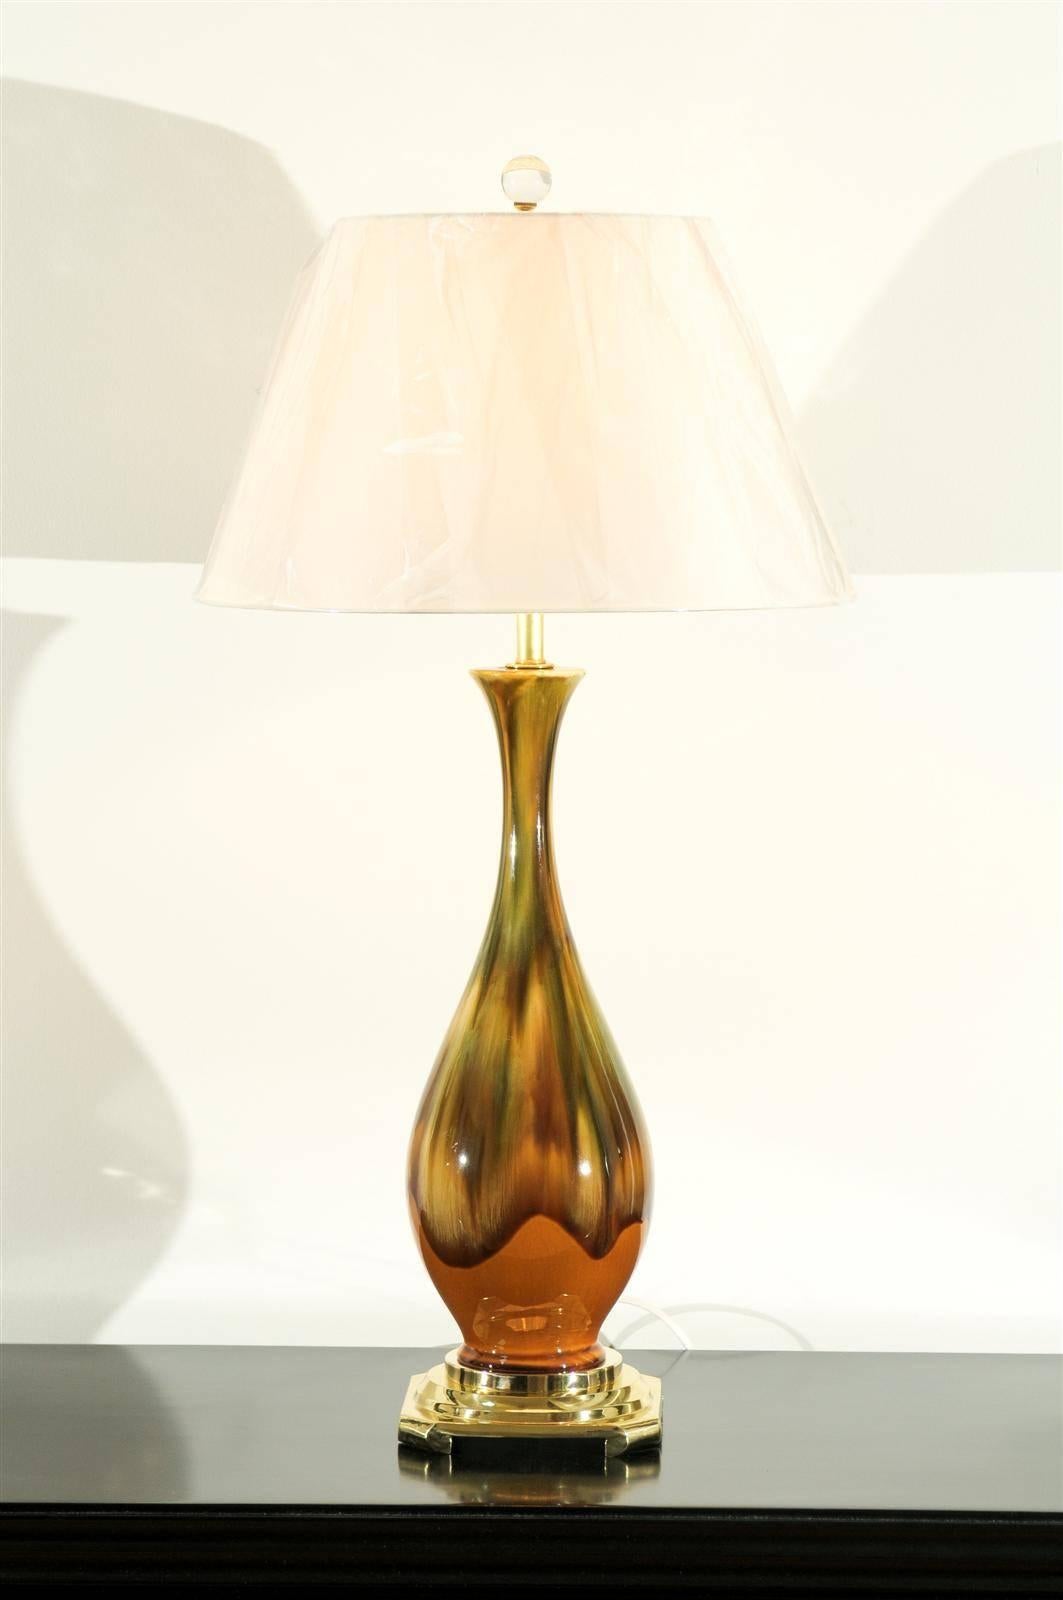 A stellar pair of vintage ceramic lamps, circa 1970. Drip glaze technique with a stunning color combination of yellow ochre, caramel and green. Beautifully crafted pieces with a rich organic quality. Exquisite jewelry! Excellent restored condition.